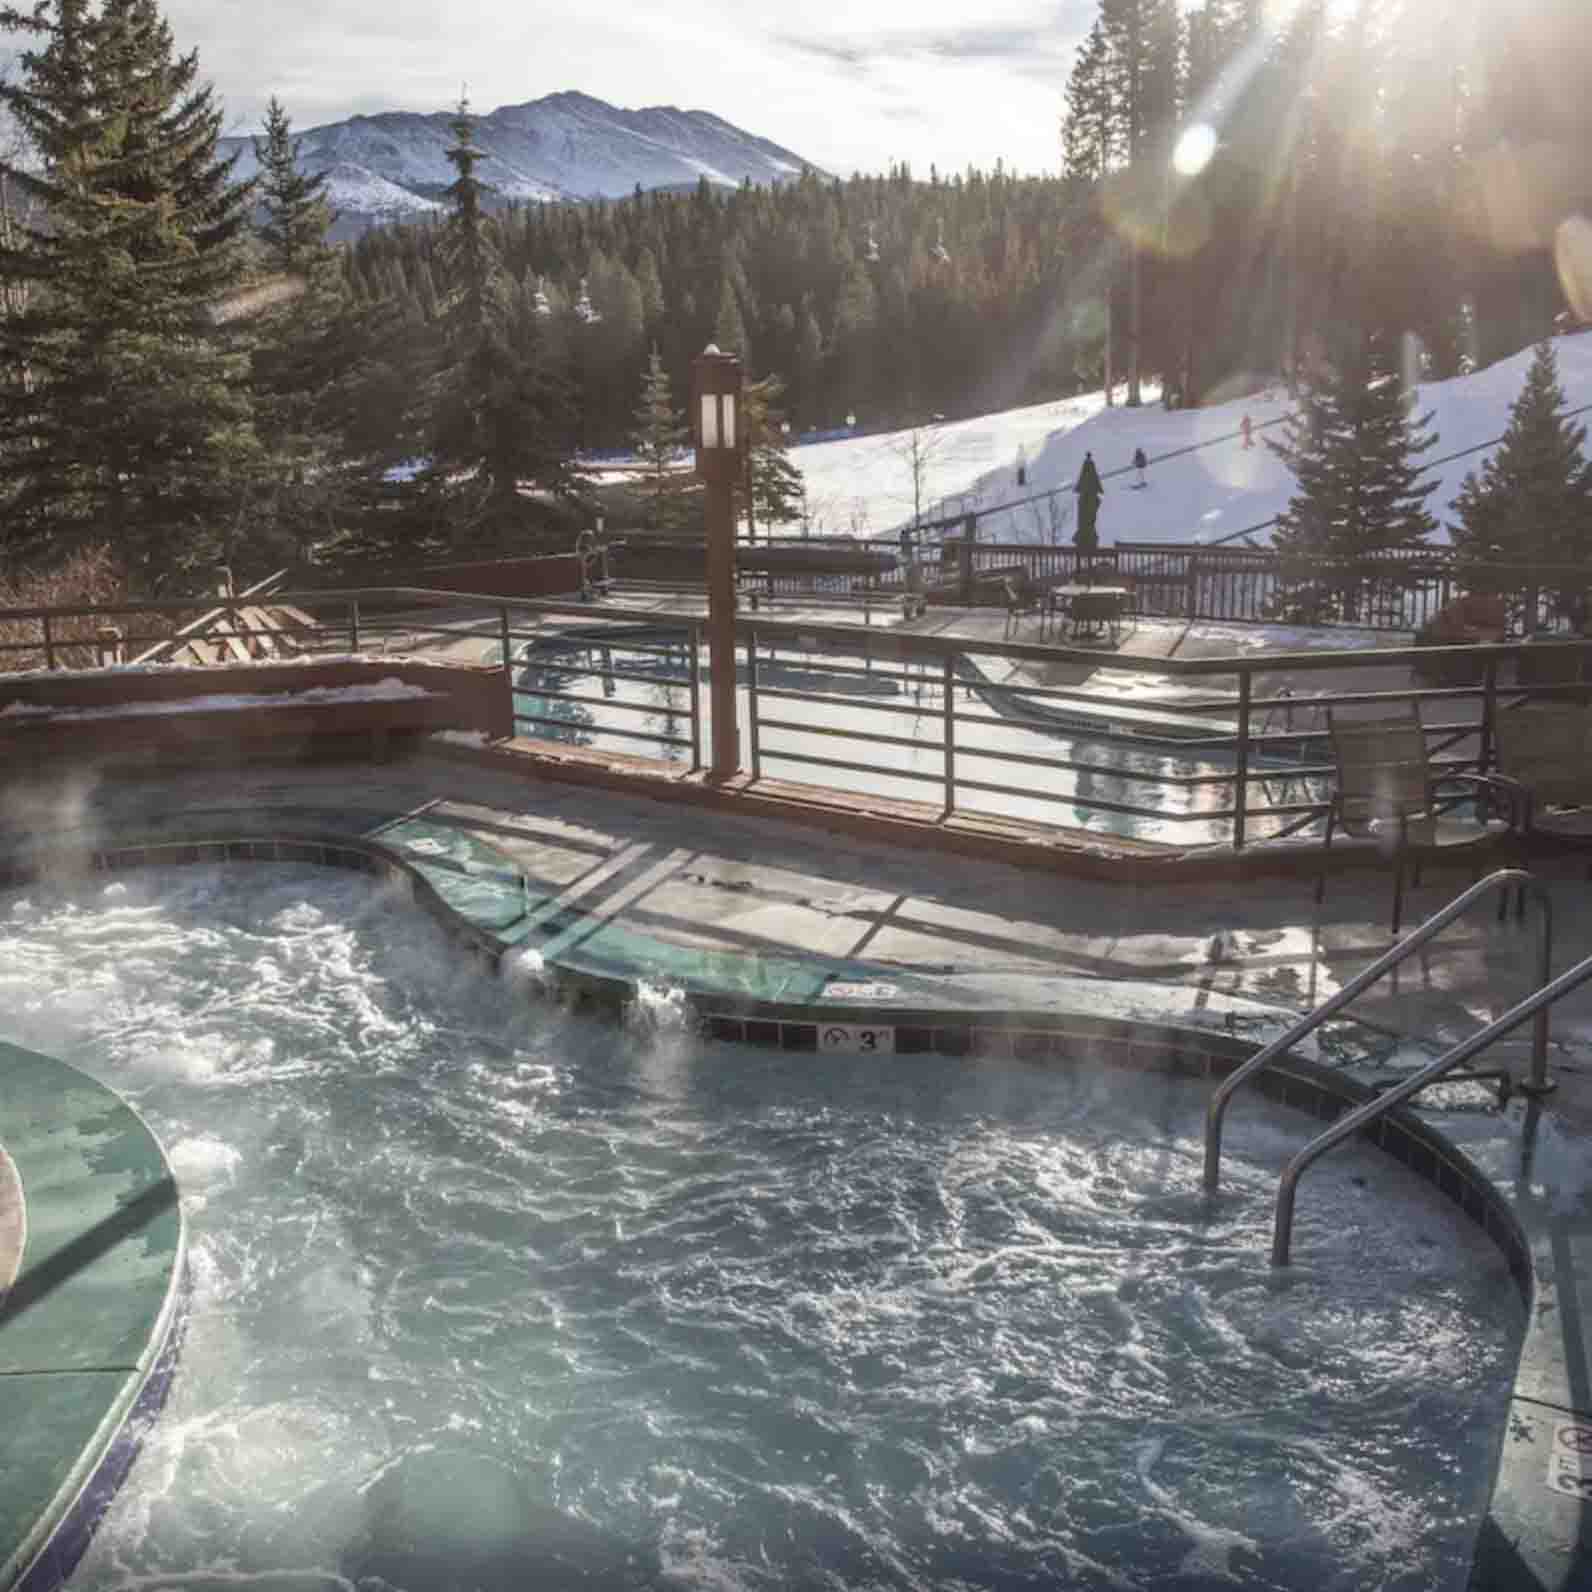 Image of hotel pool in snowy mountains